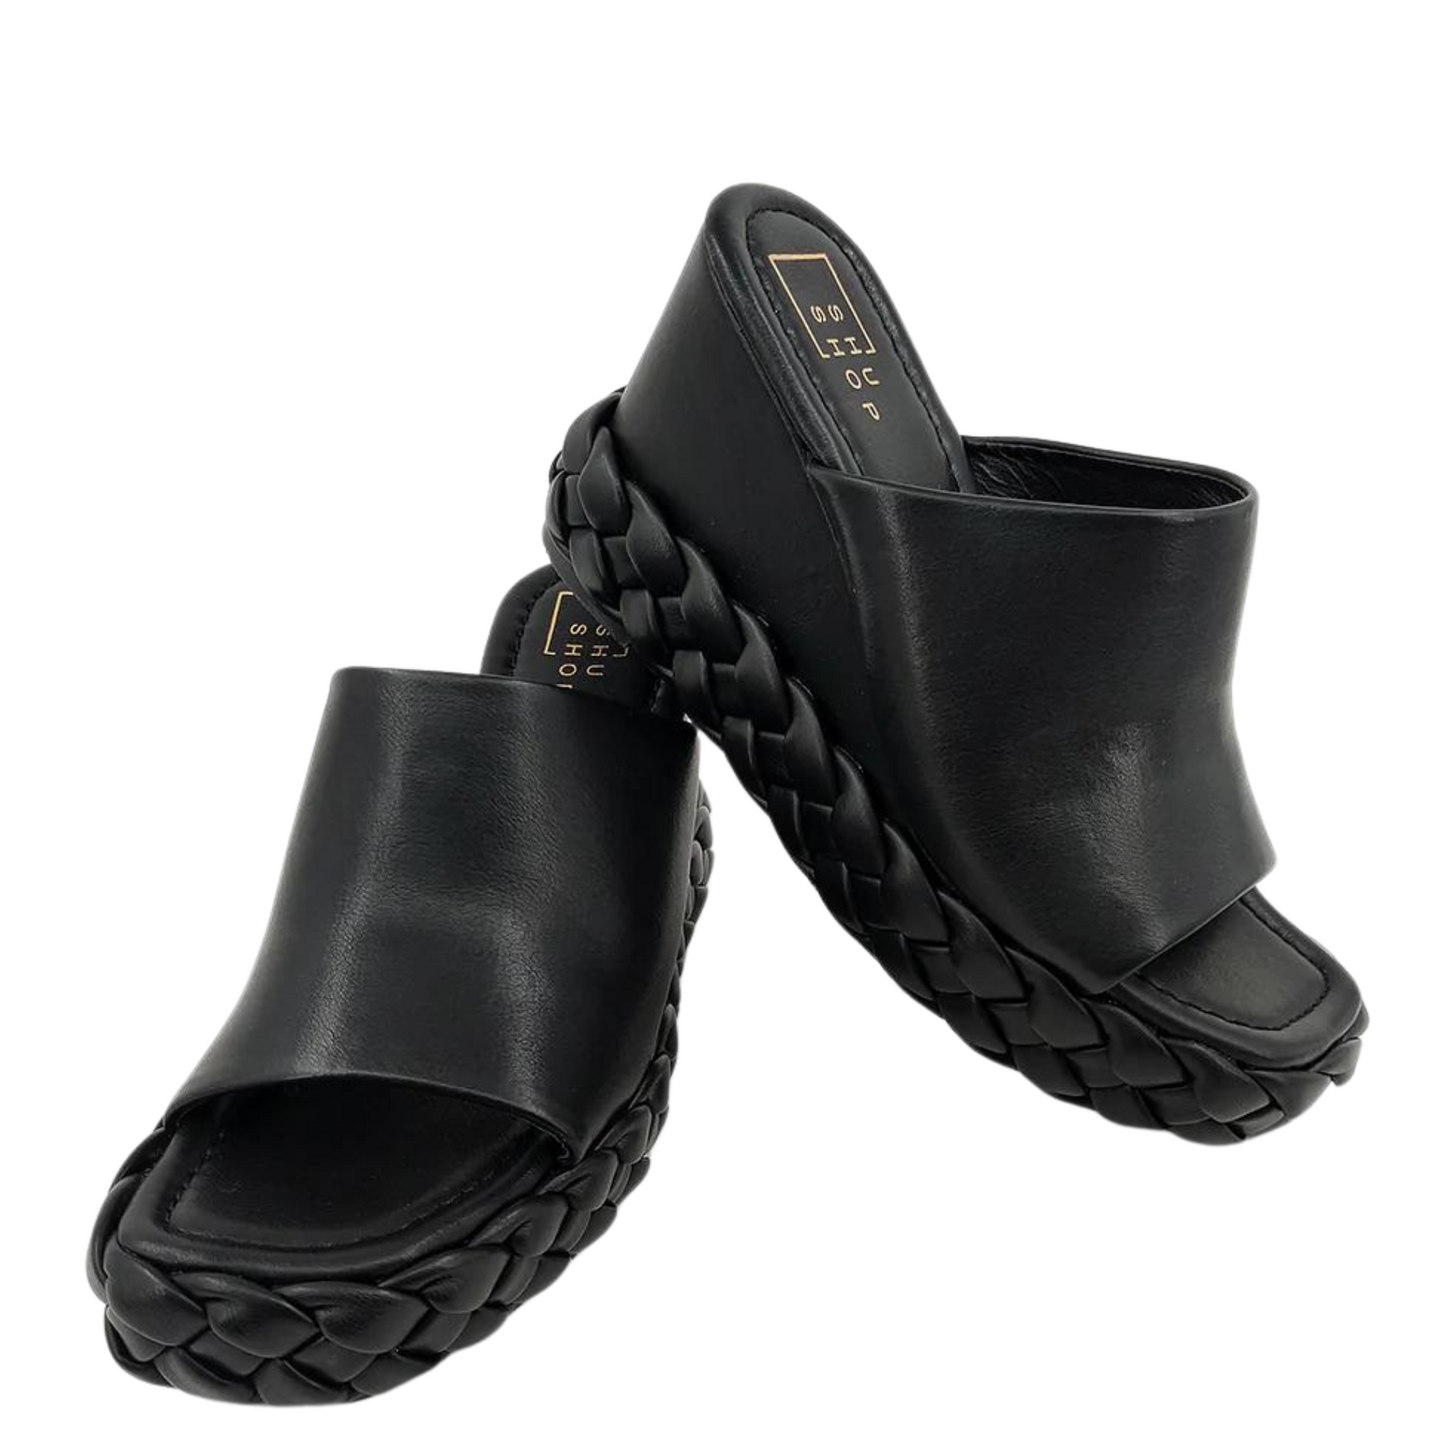 Letizia sandals provide an elegant, modern look with their braided sole and open toe wedge design. The taupe and black colors guarantee they can match any outfit. Enjoy complete comfort with these modern summer sandals.